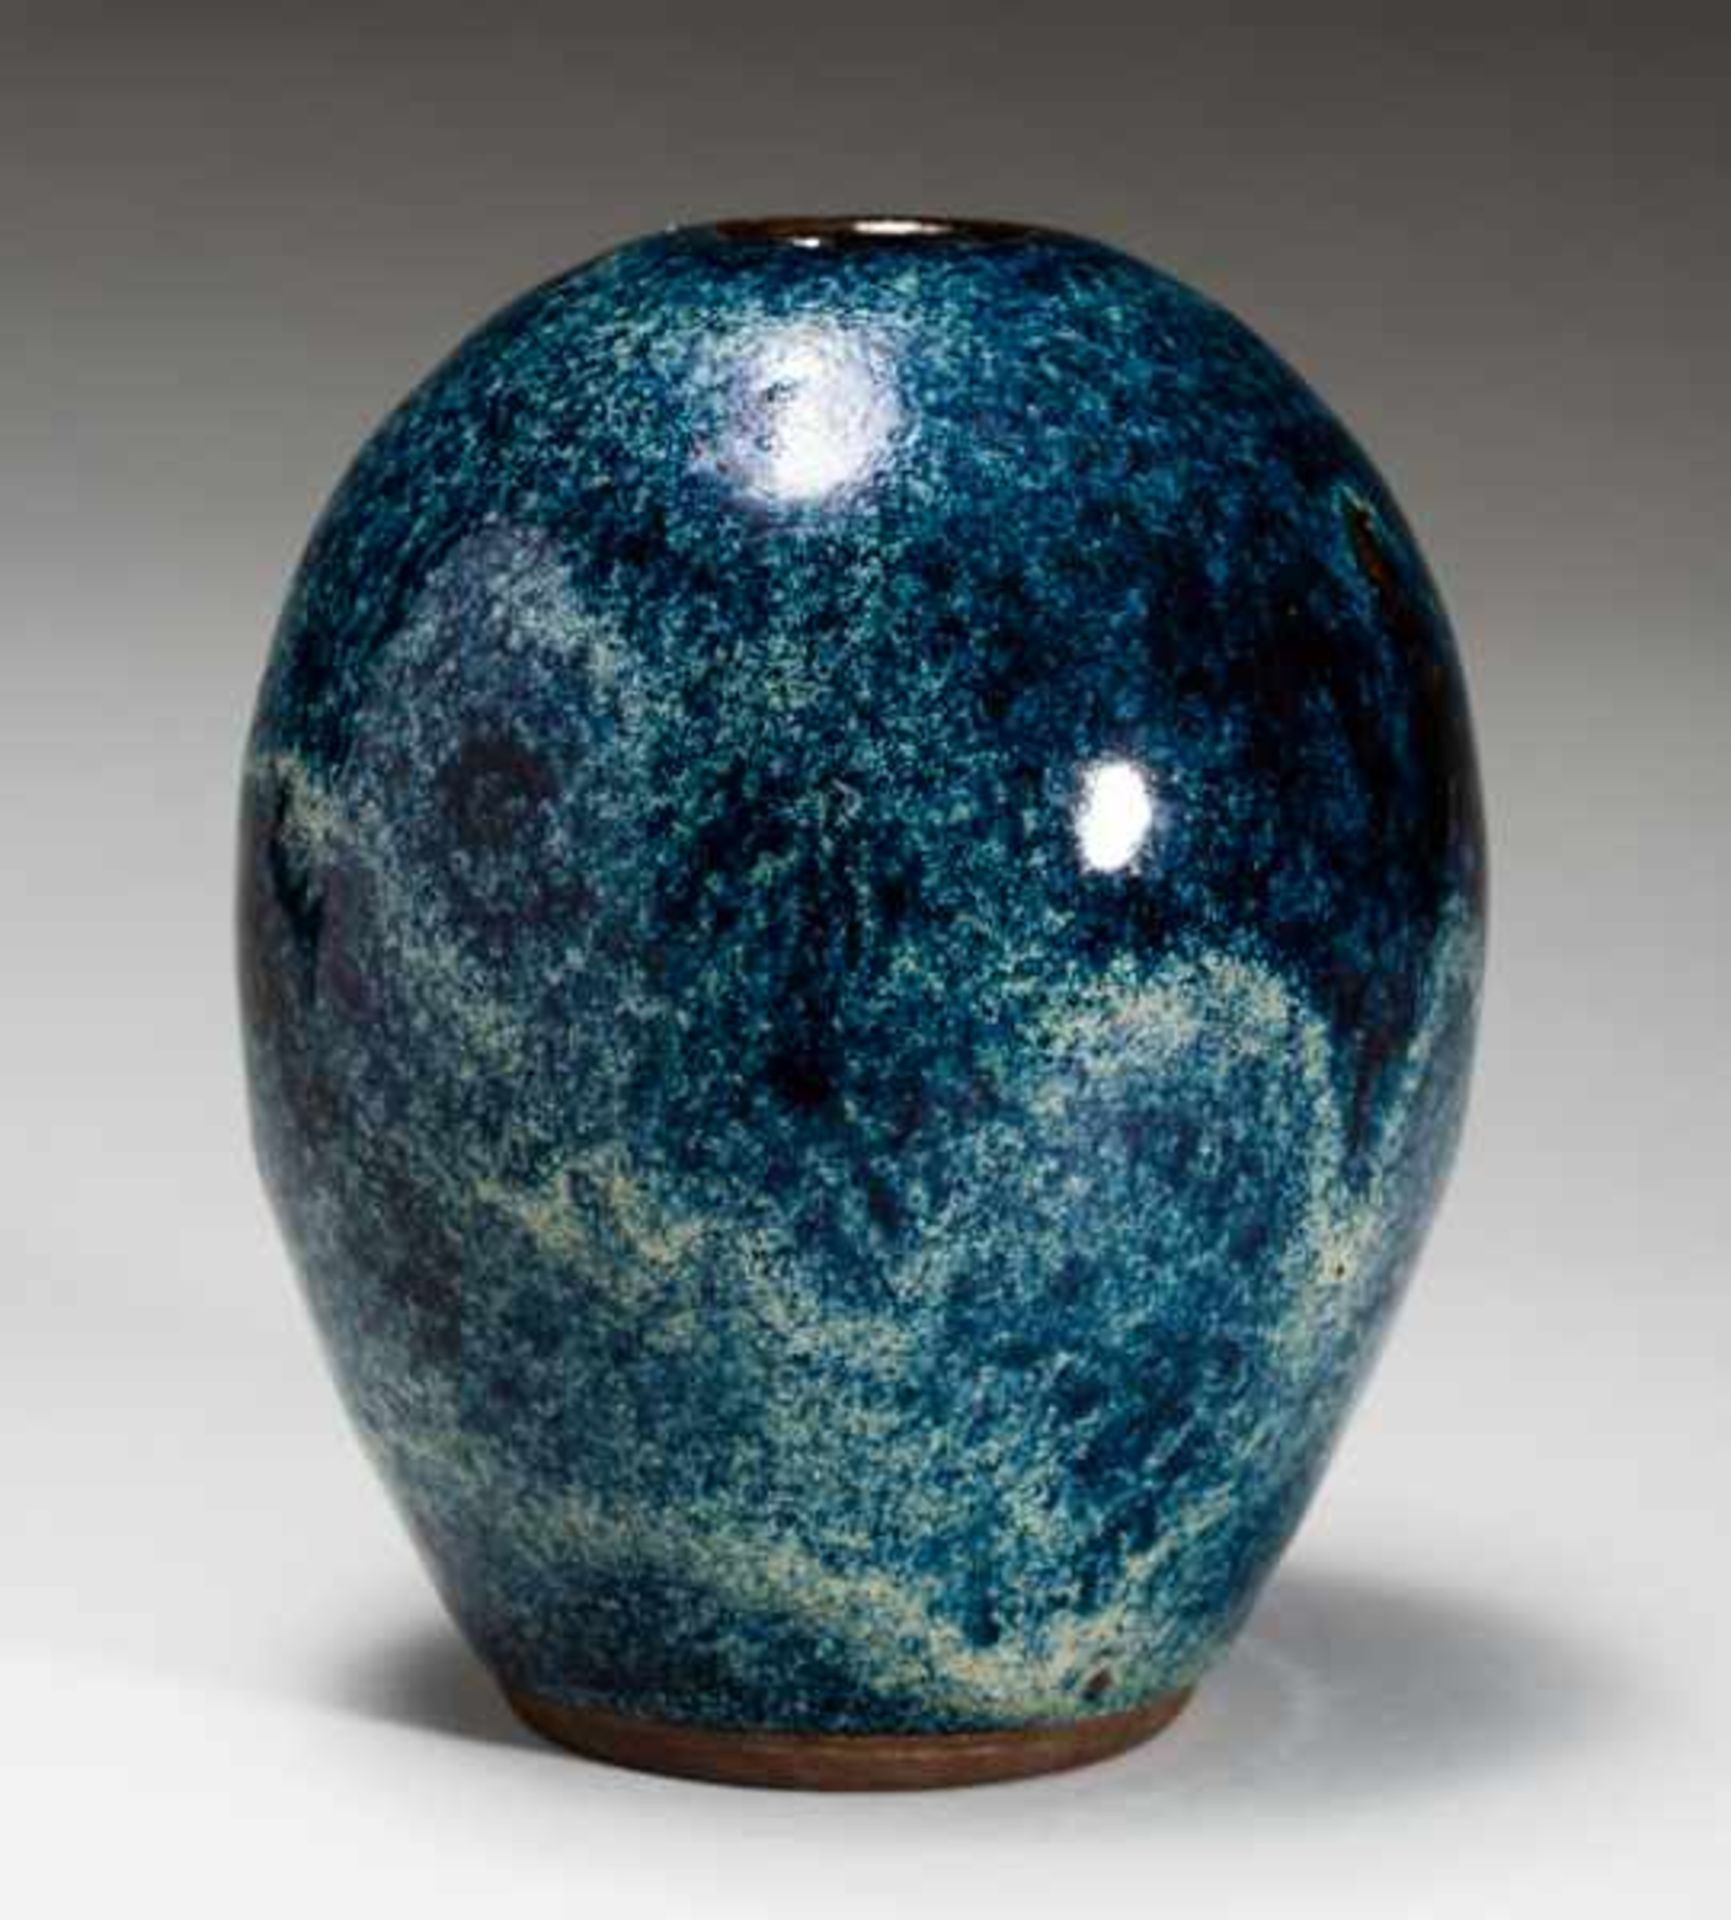 OVAL VASE WITH SPECKLED GLAZE Glazed ceramic. China, The oval vase has no neck and the opening is